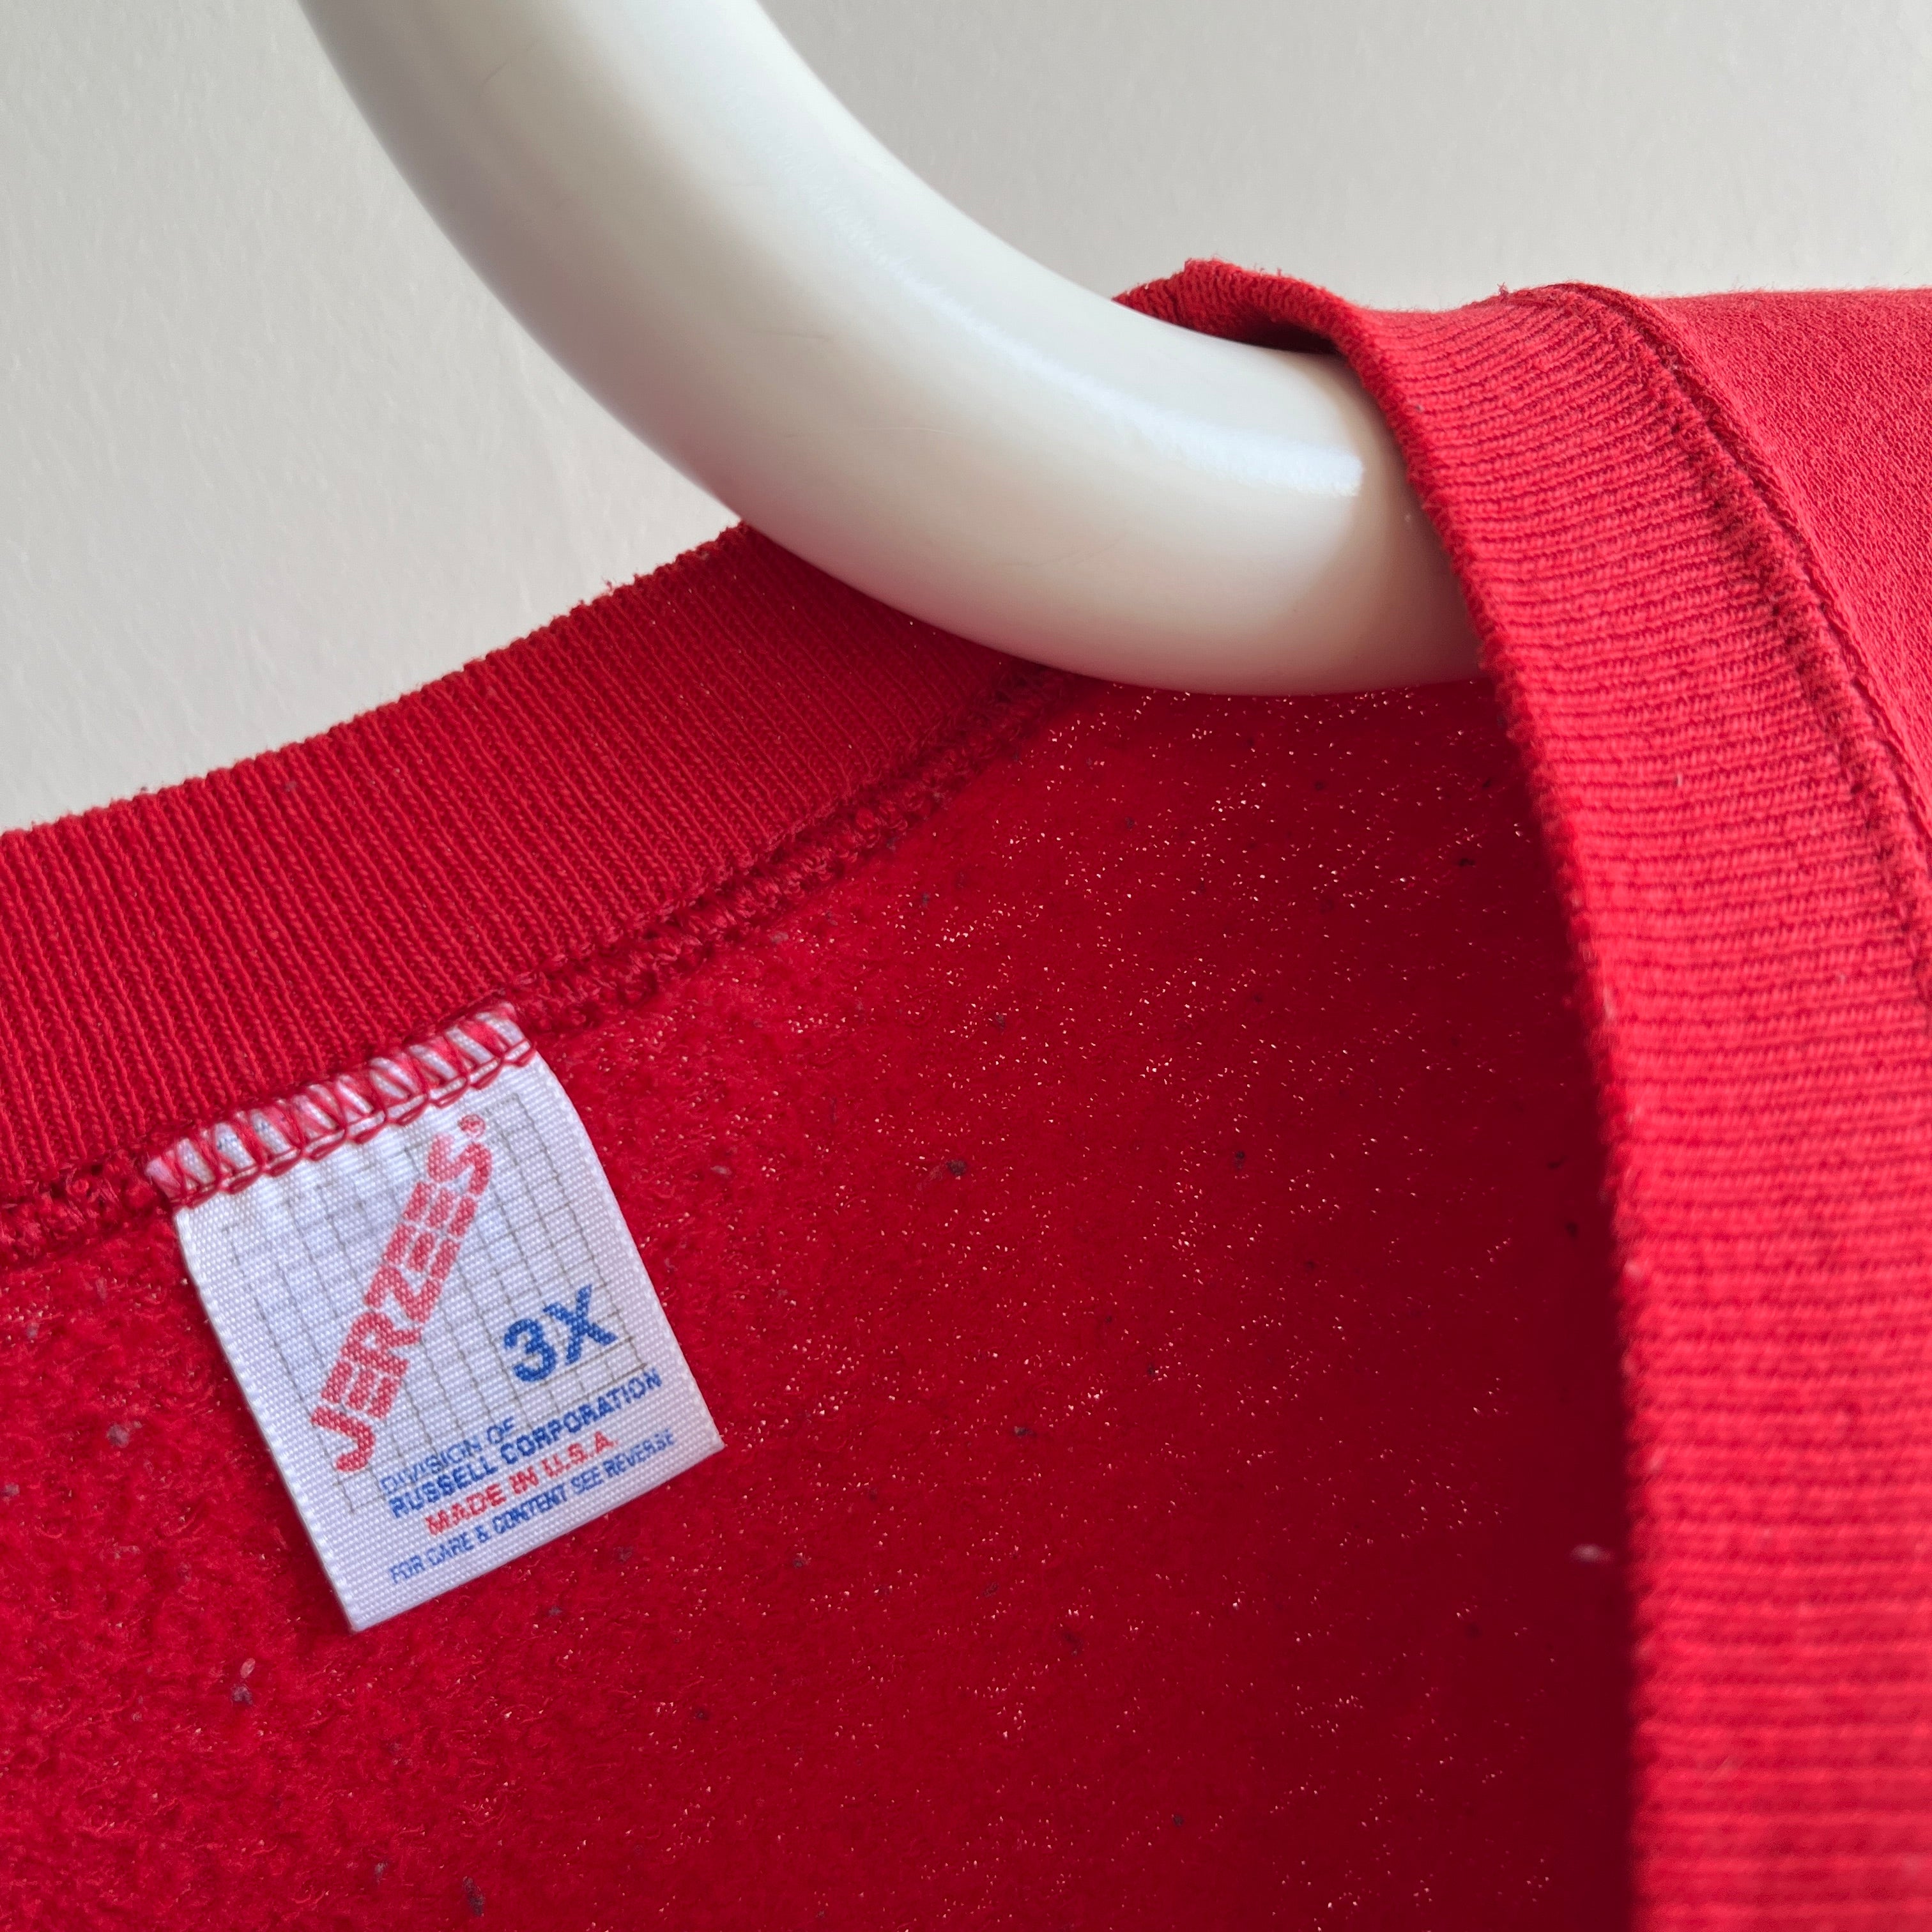 1980s Thinning Worn Out Beat Up Blank Red Sweatshirt by Jerzees - Labeled 3X